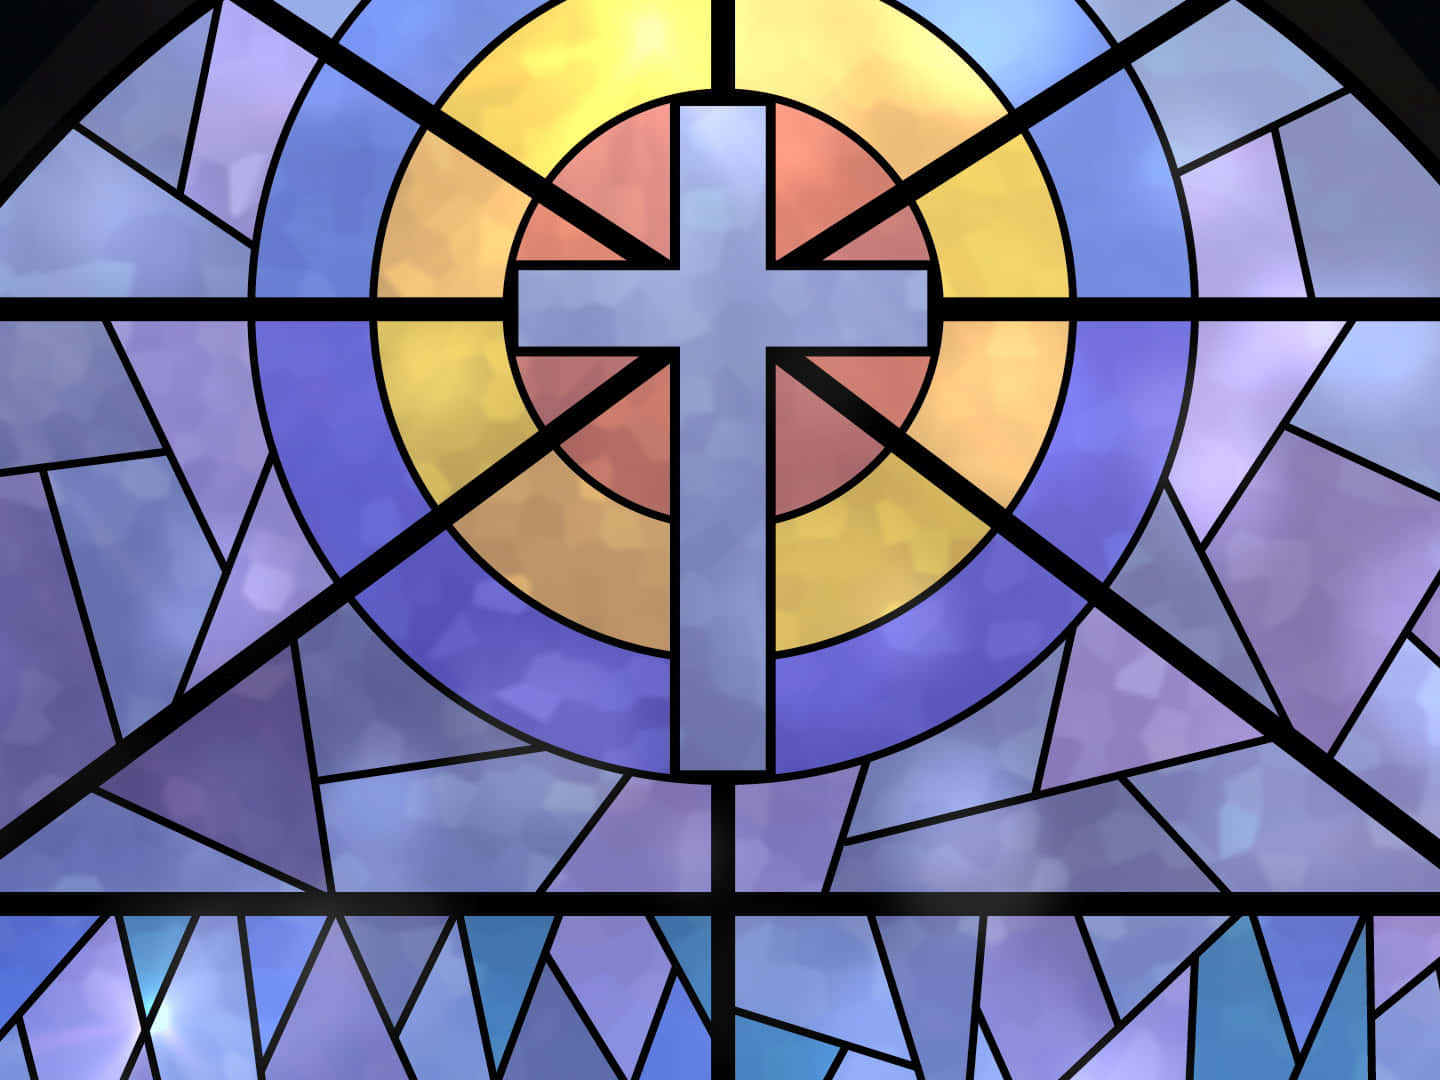 A Stained Glass Window With A Cross In The Middle